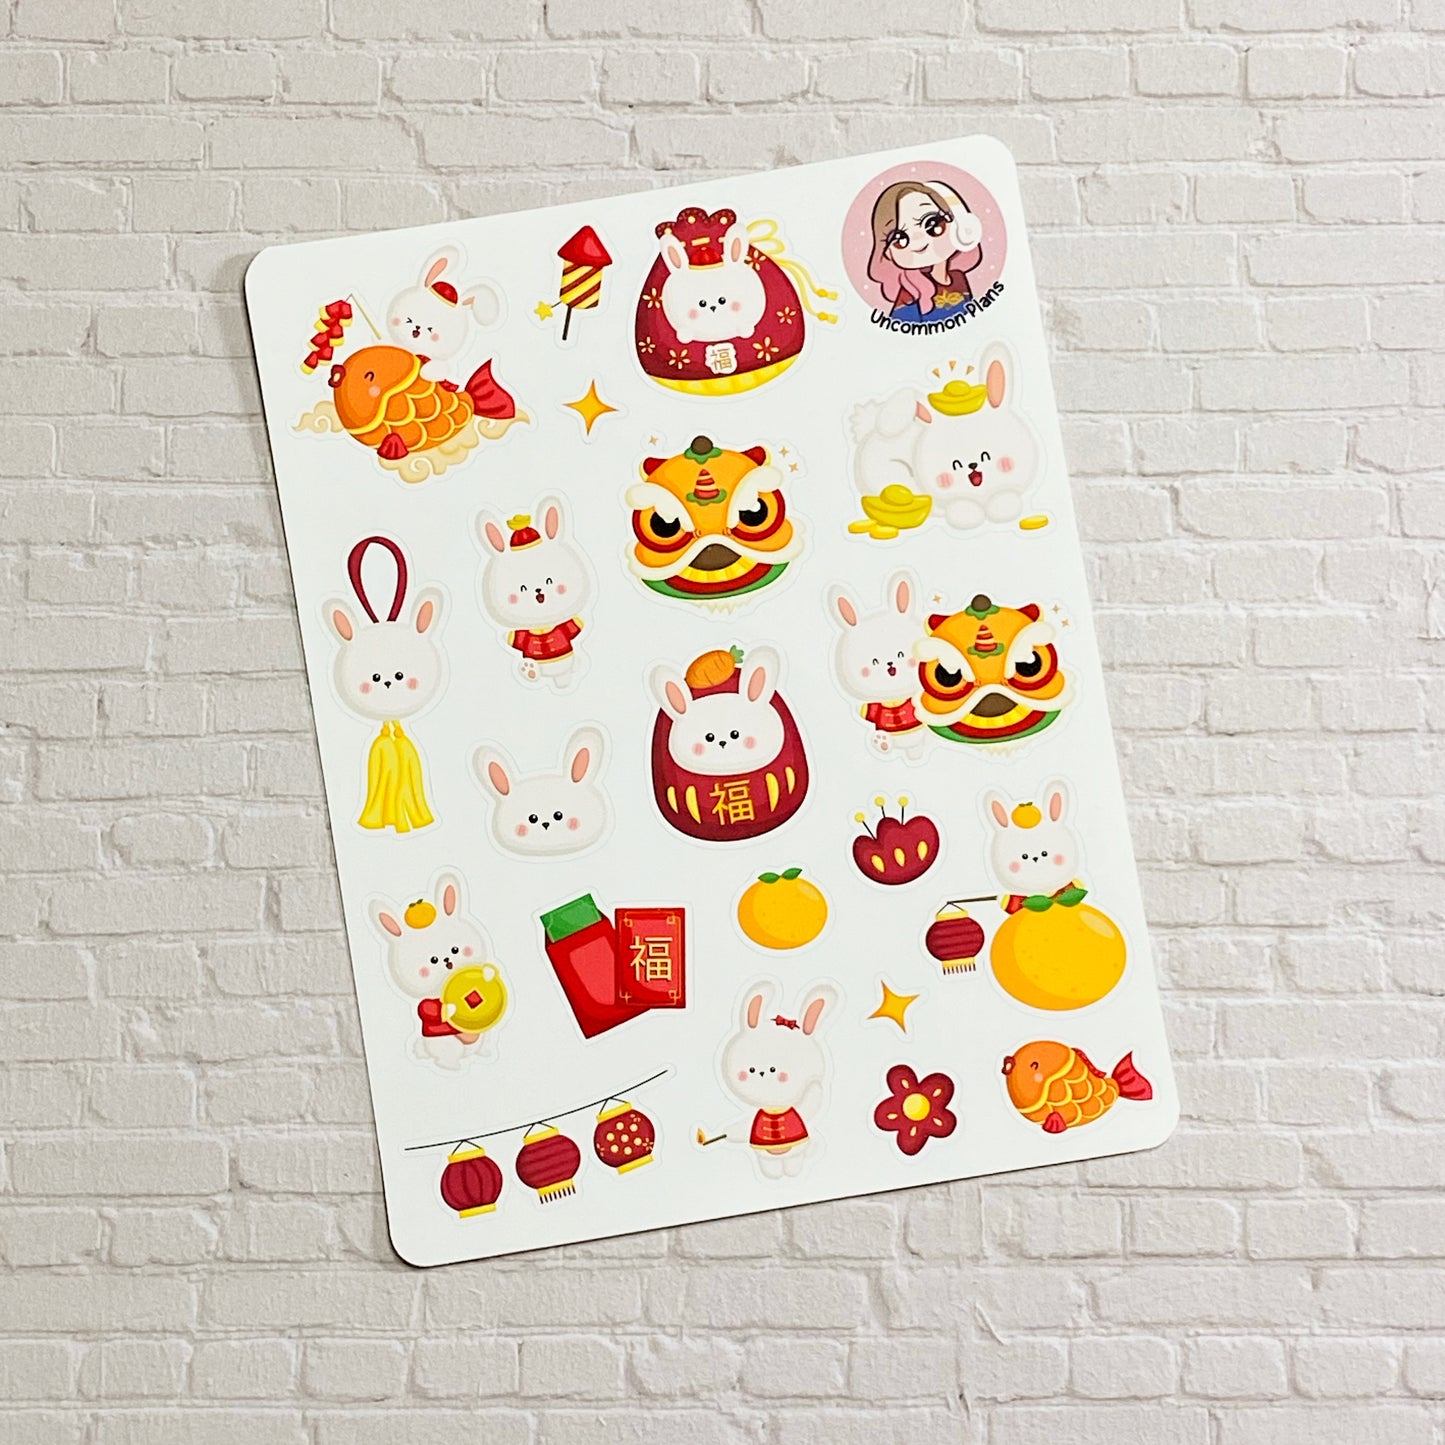 Lunar New Year Stickers Sheet - Year of the Rabbit 2023